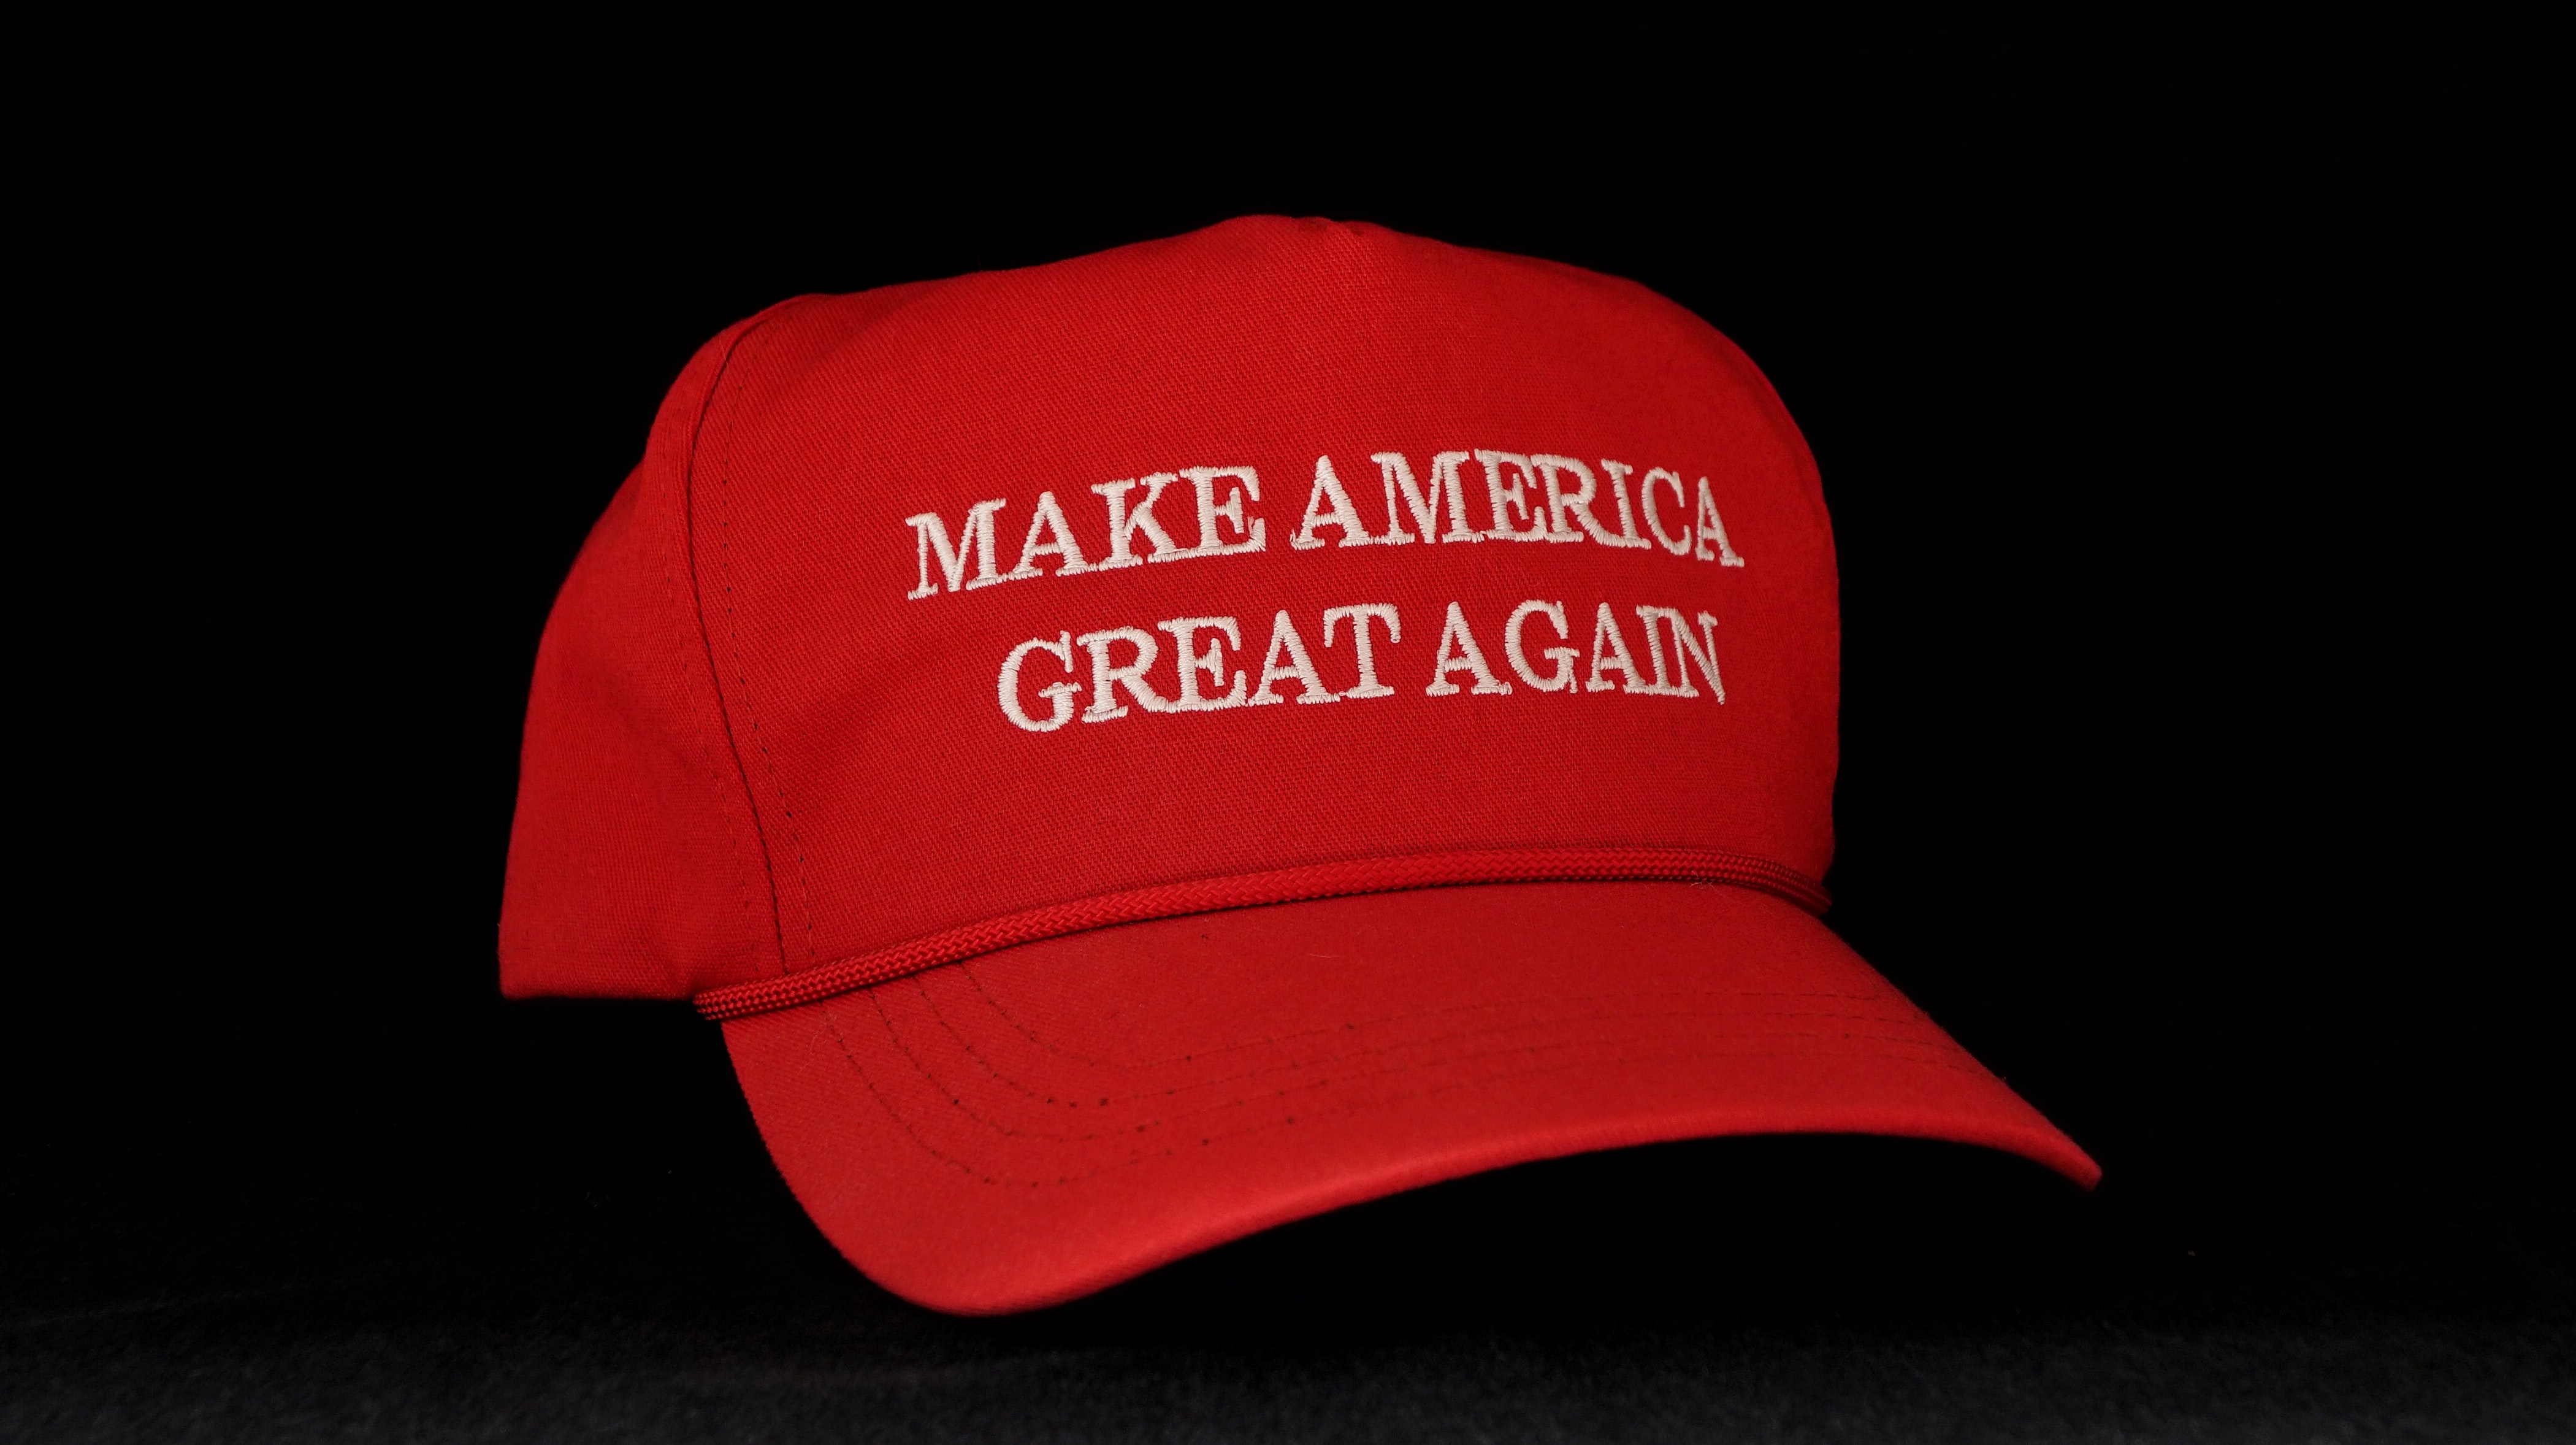 The iconic red "Make America Great Again" hat against a dark background.